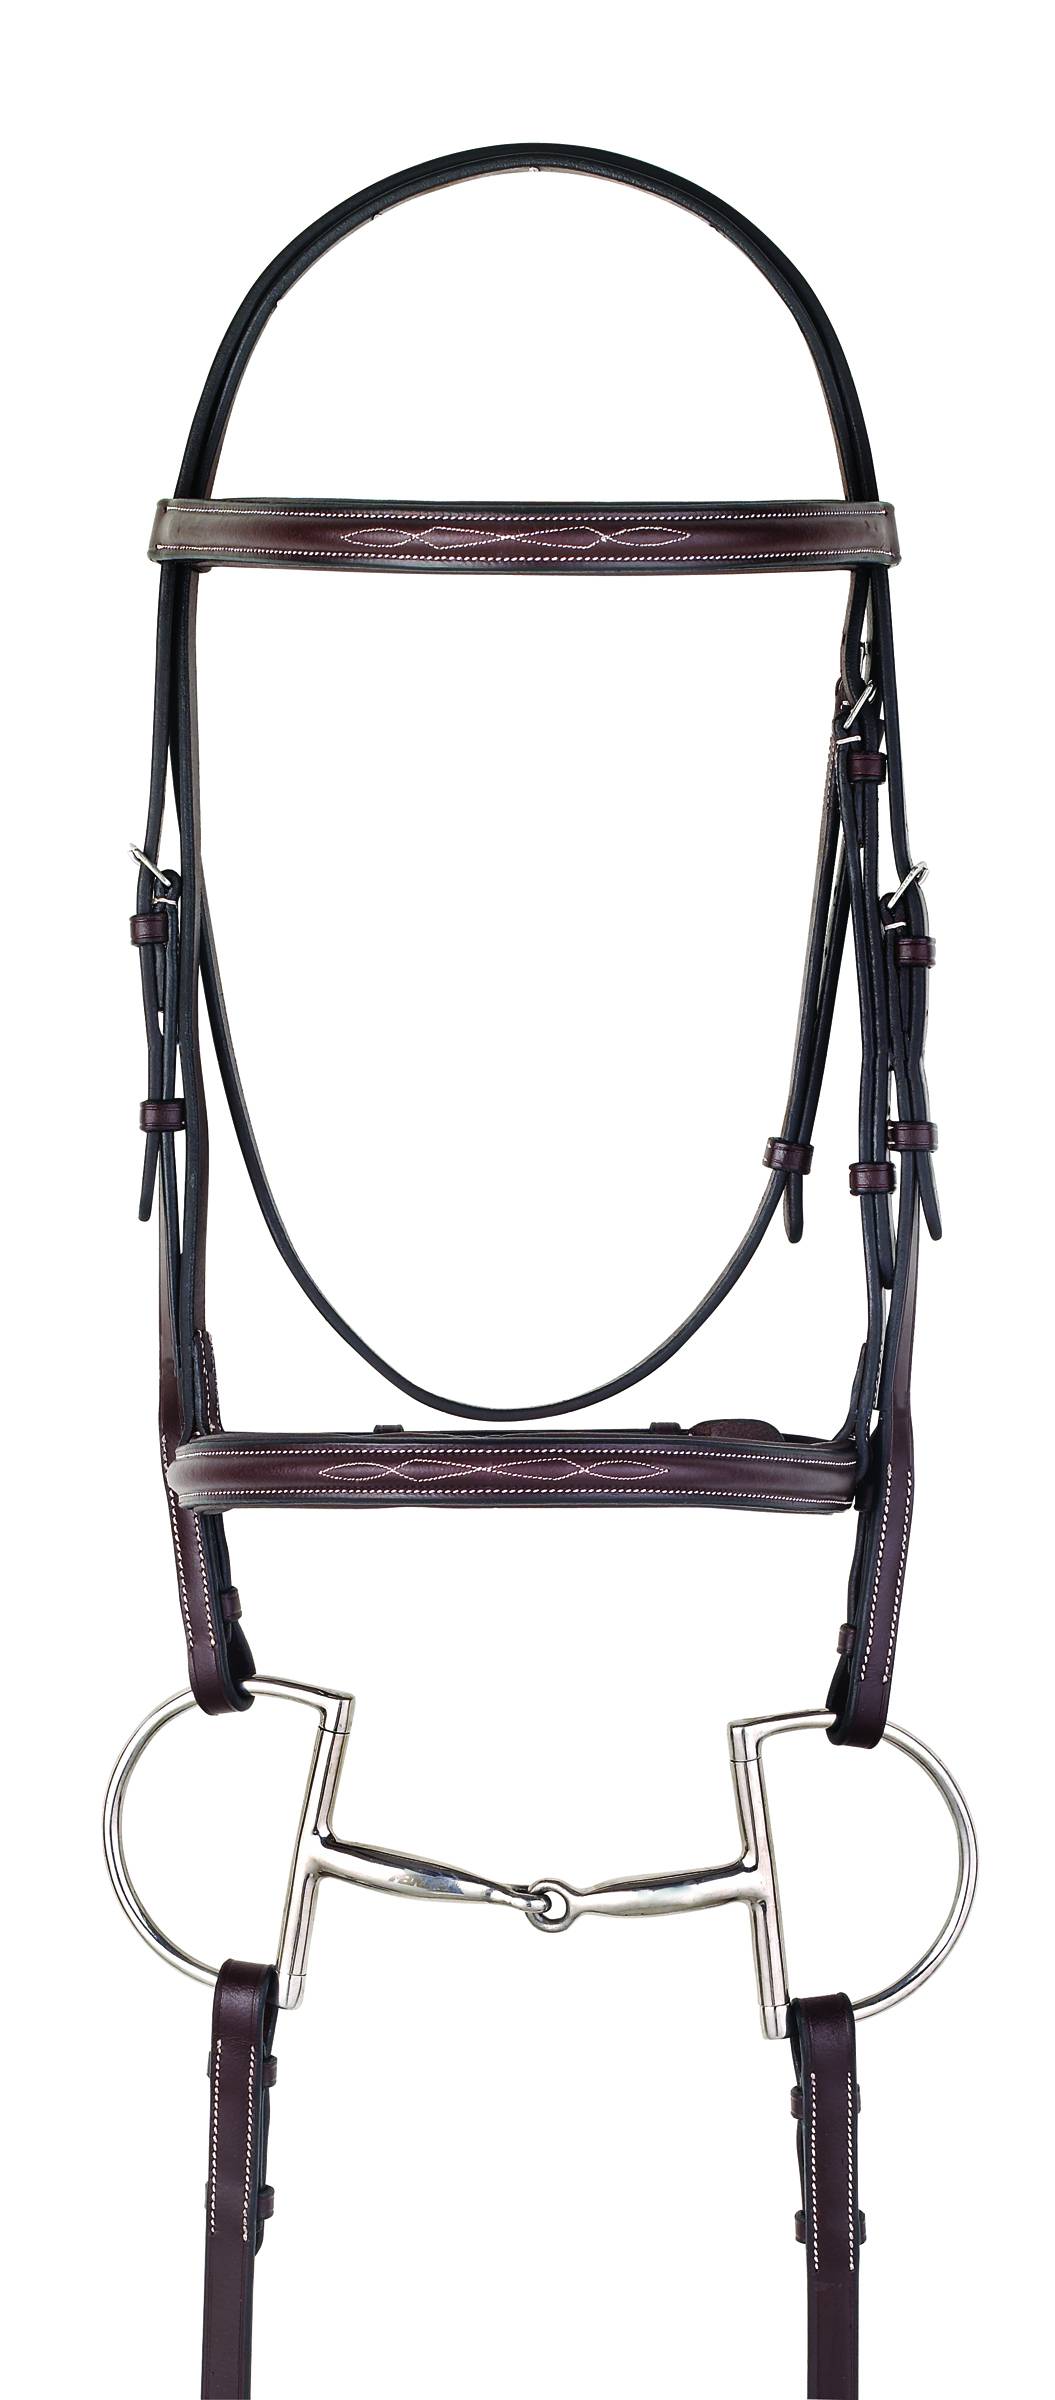 Camelot Gold Fancy Raised Padded Bridle with Reins